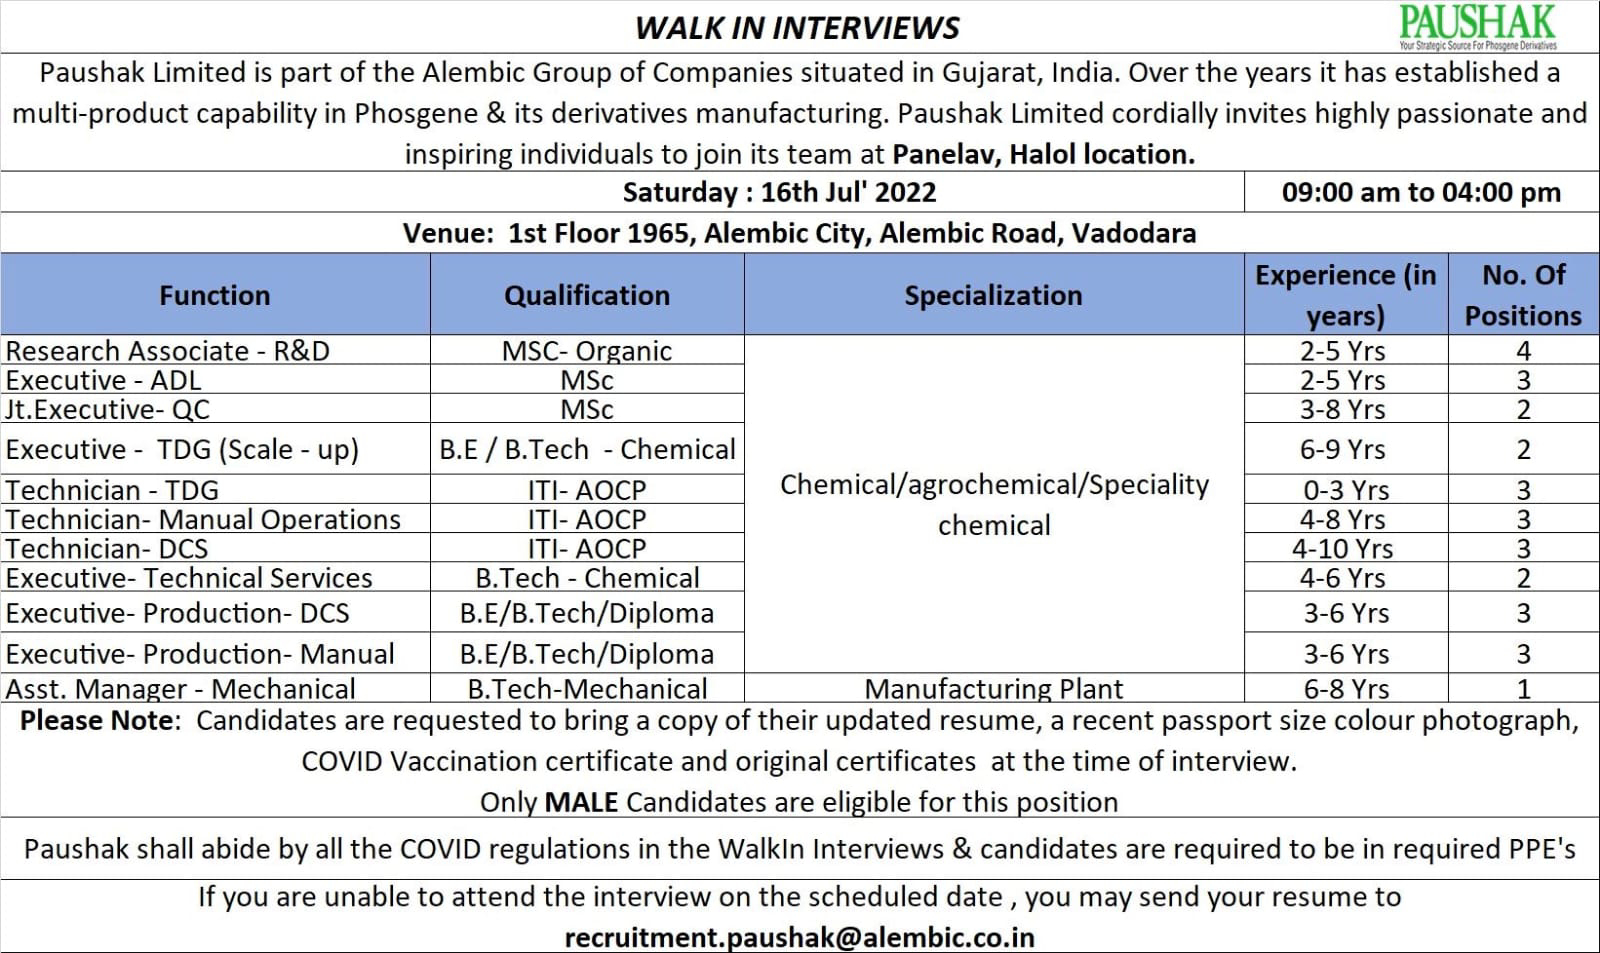 Job Available's for Paushak Ltd Walk-In Interview for MSc Organic/ BE/ B Tech Chemical/ ITI- AOCP/ Diploma/ Mechanical